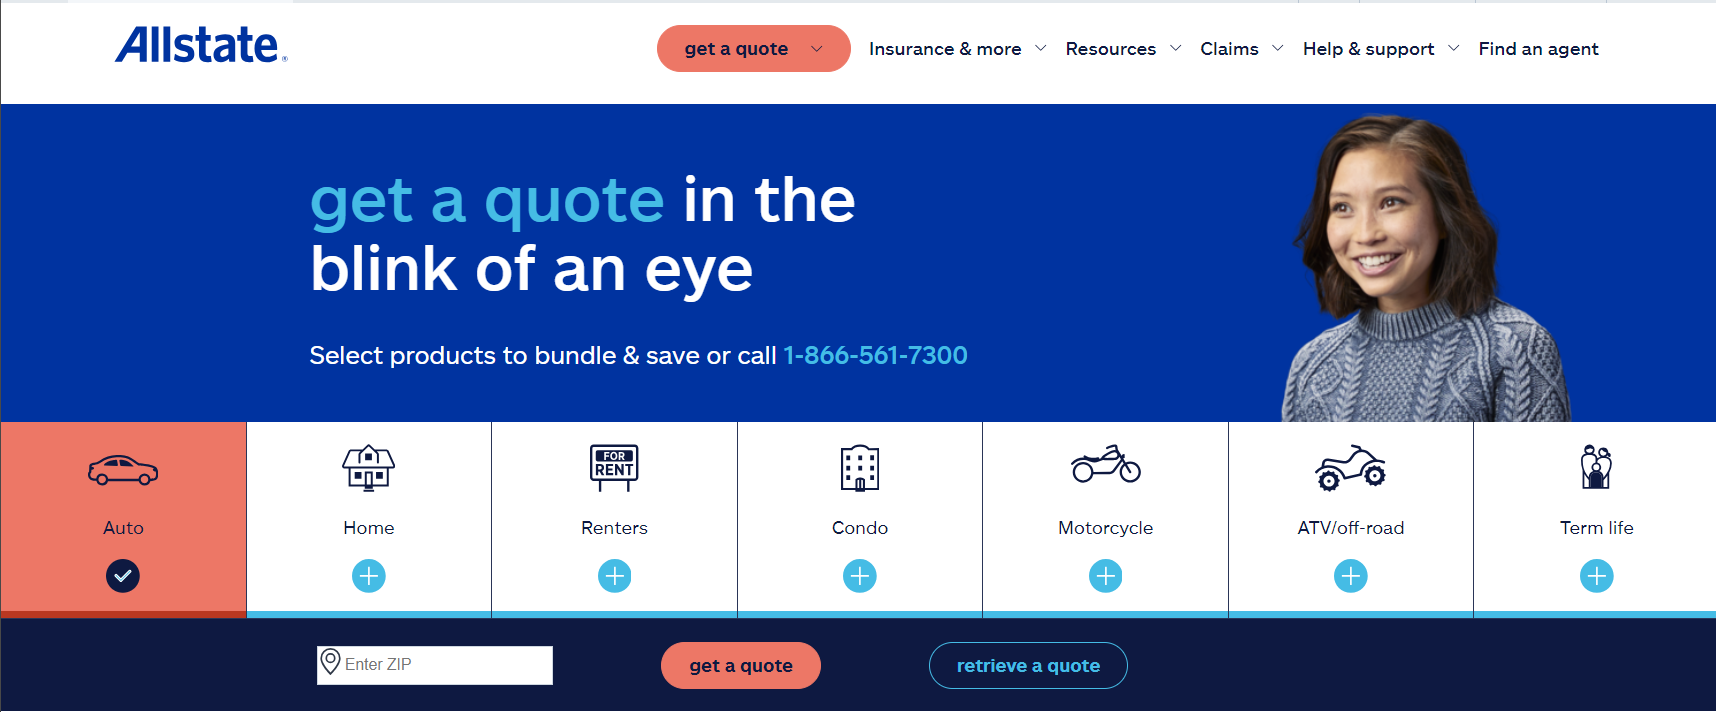 Allstate Site Screenshot: Best Auto Insurance for Drivers with Dementia